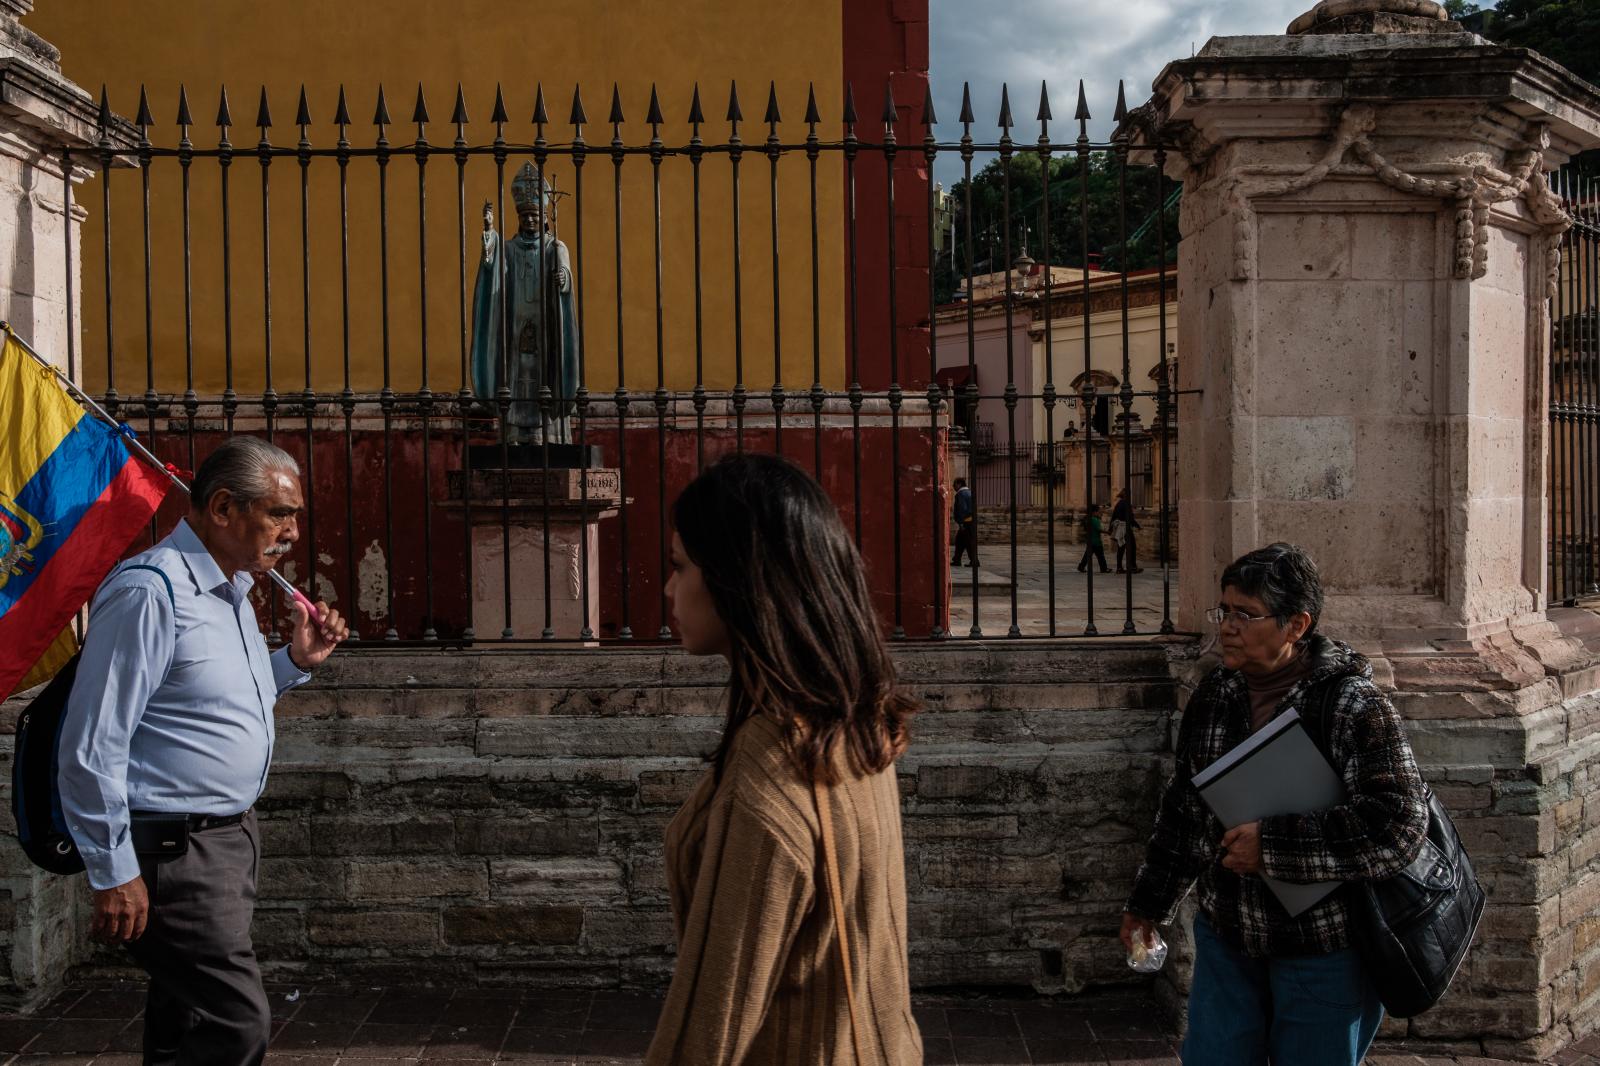 Catholicism in Mexico: An Exploration